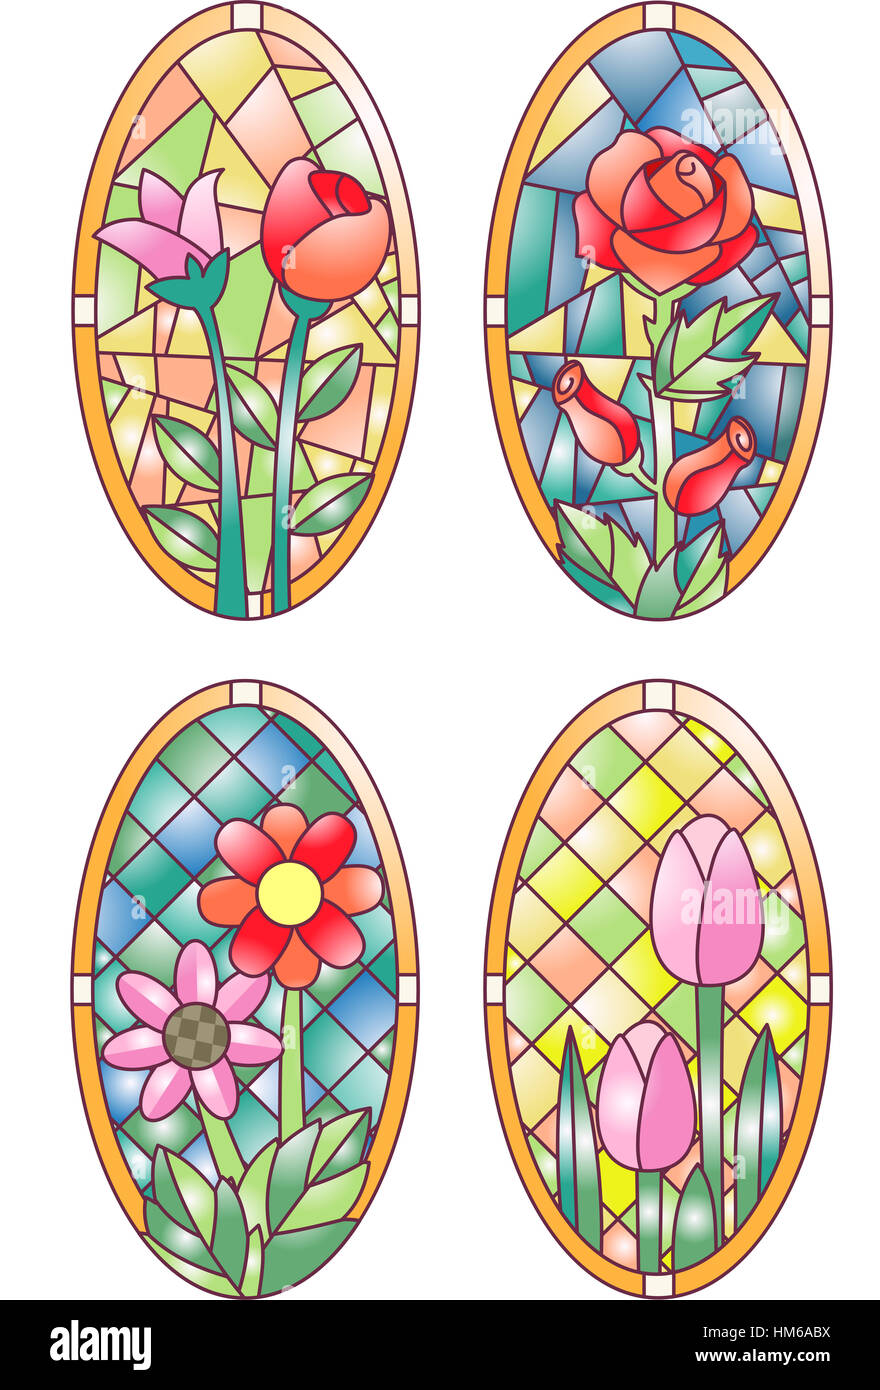 Illustration Featuring Colorful Stained Glasses Designed with Flowers Stock Photo